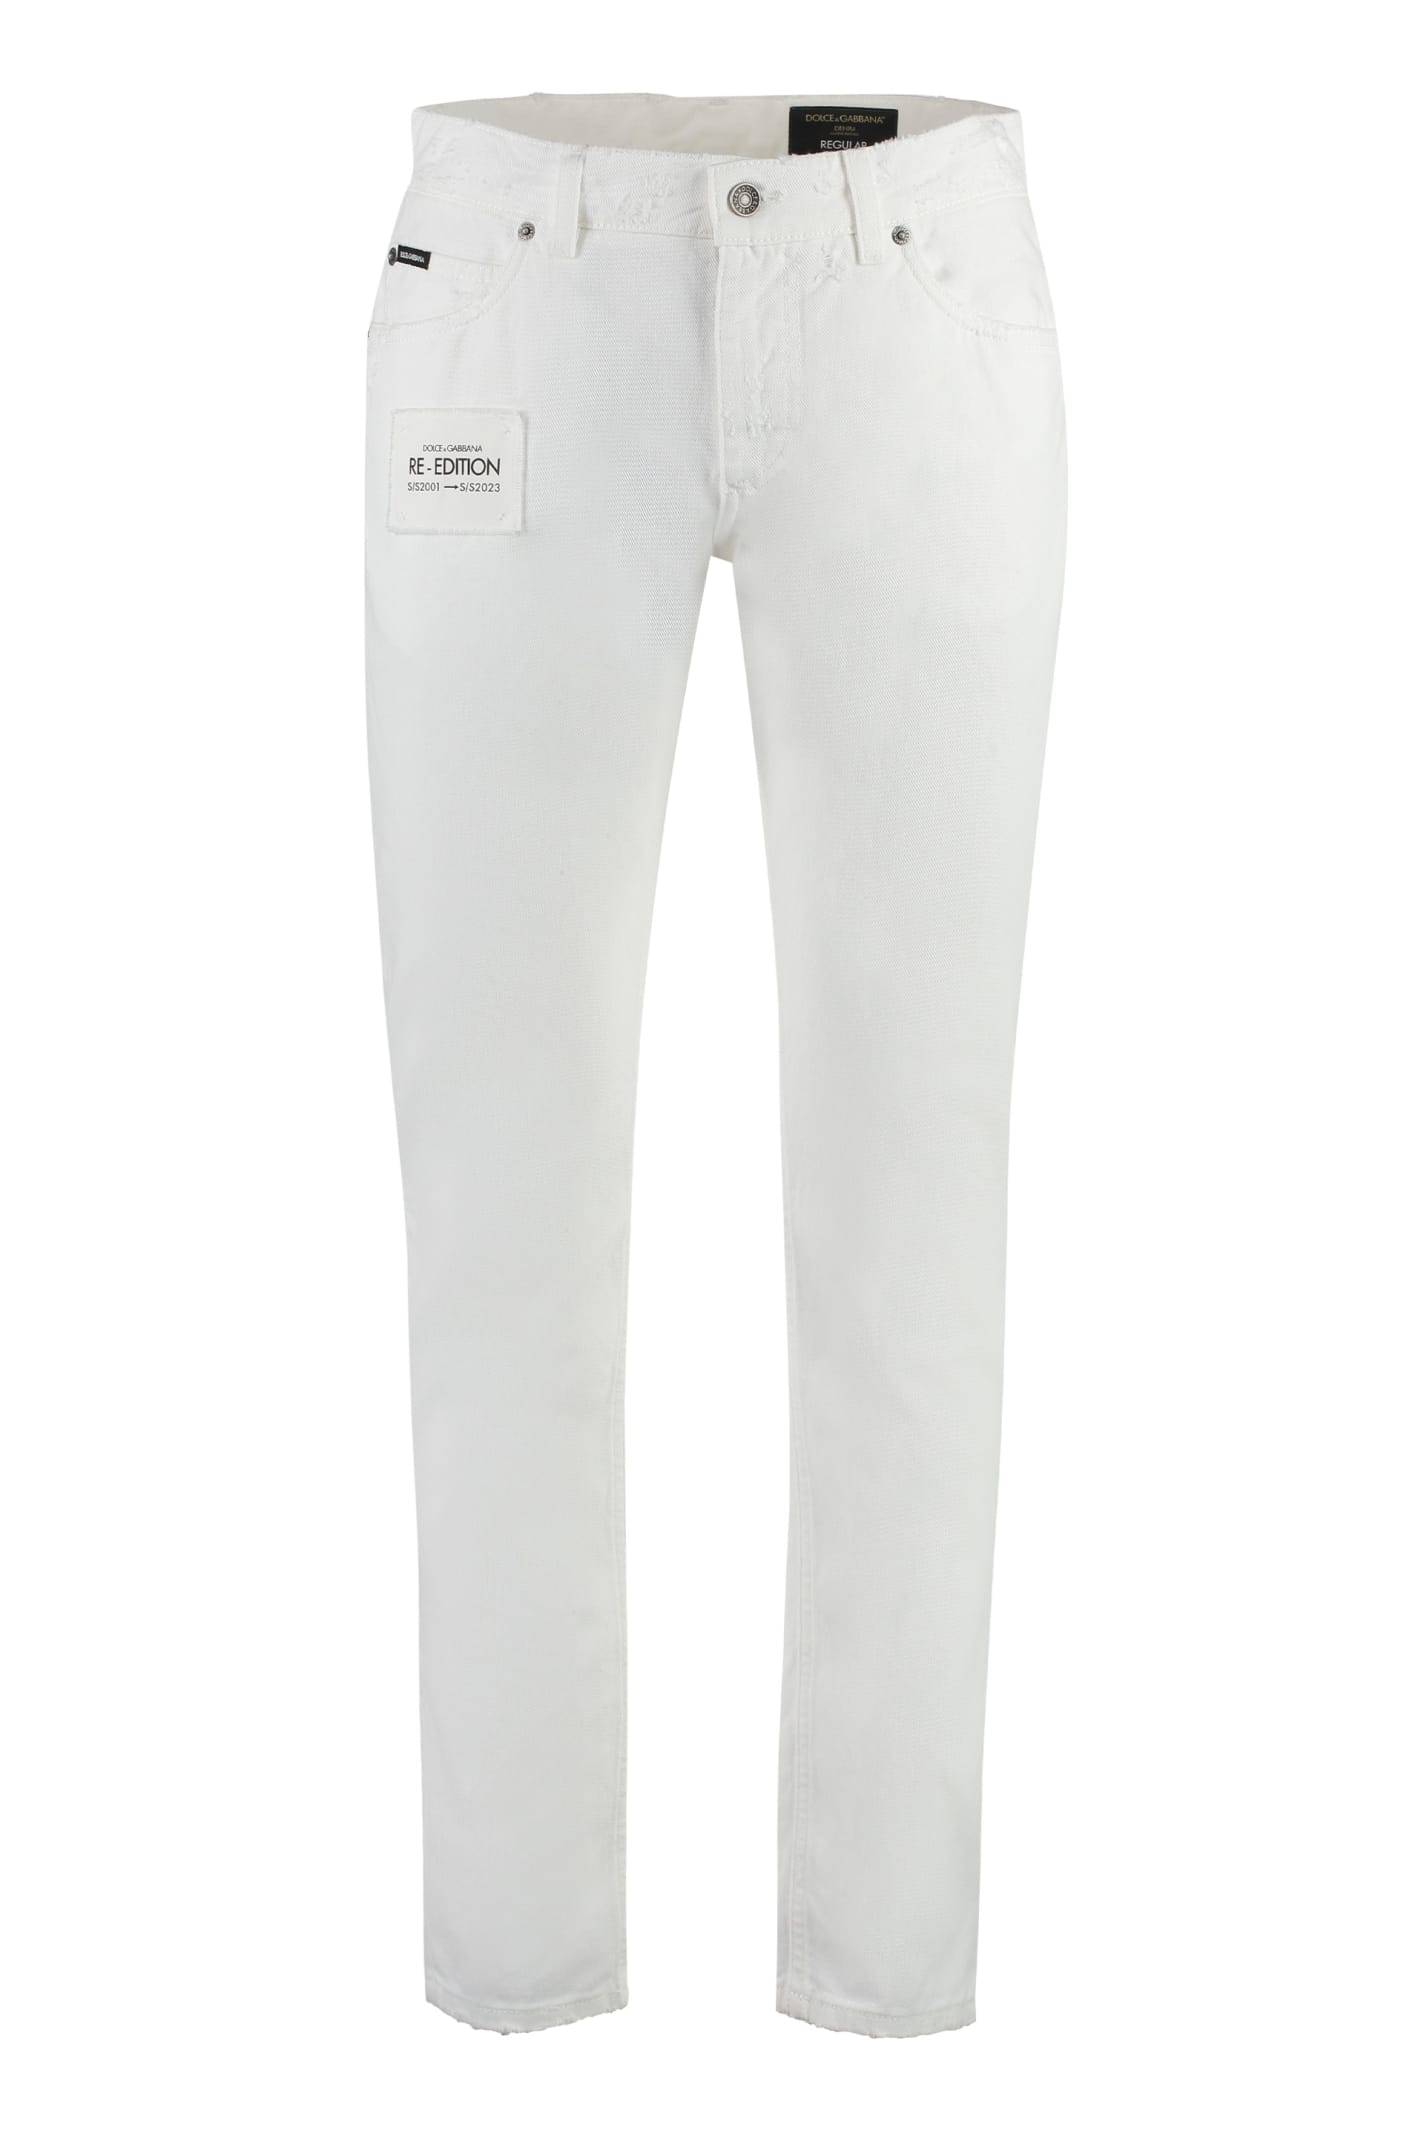 Dolce & Gabbana Regular Fit Jeans In White